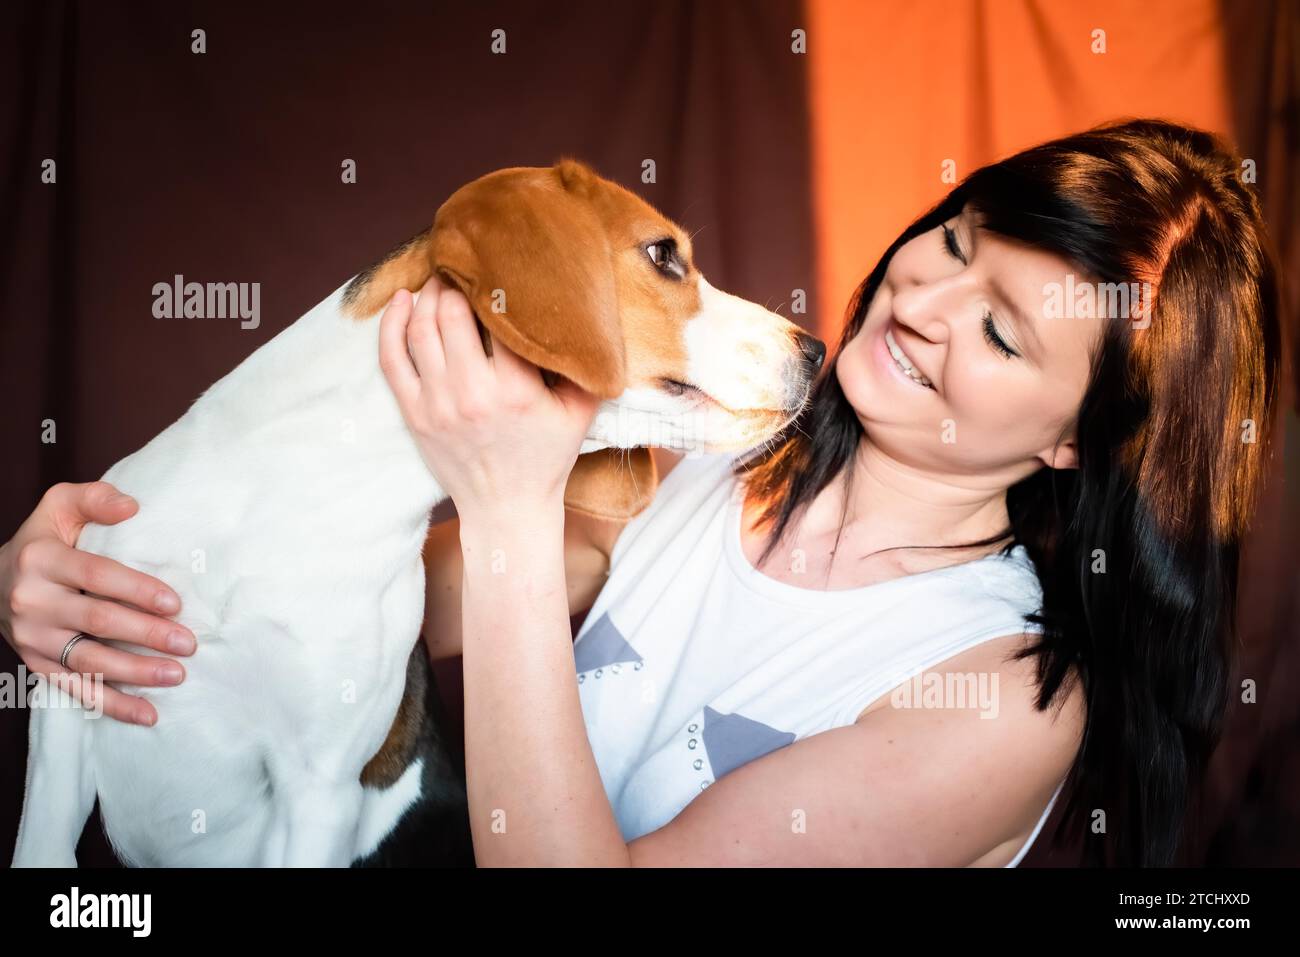 Young woman cuddle with Beagle dog in bright interior. Pet friendship concept Stock Photo